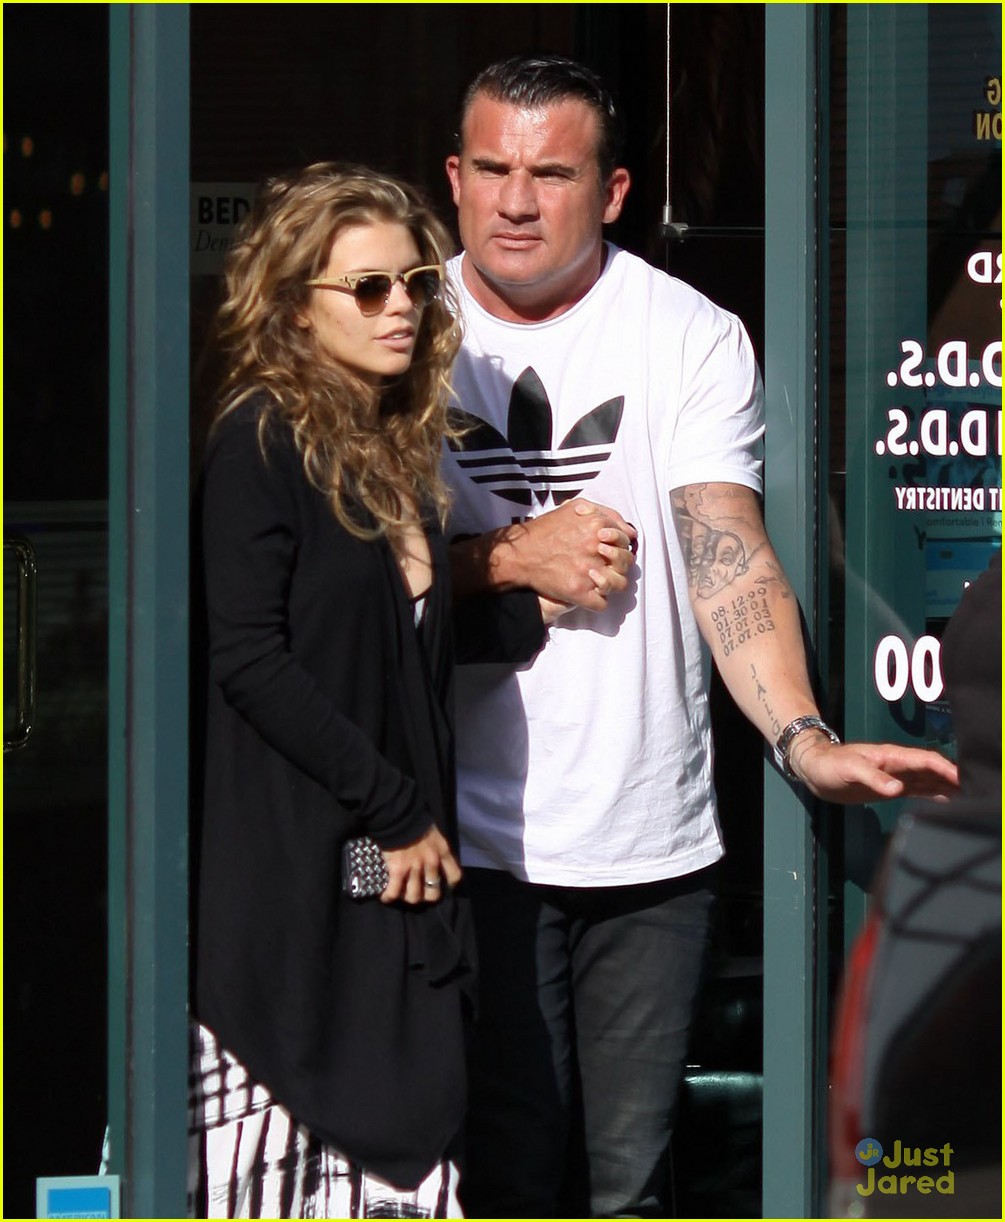 annalynne mccord dentist visit with dominic purcell 01